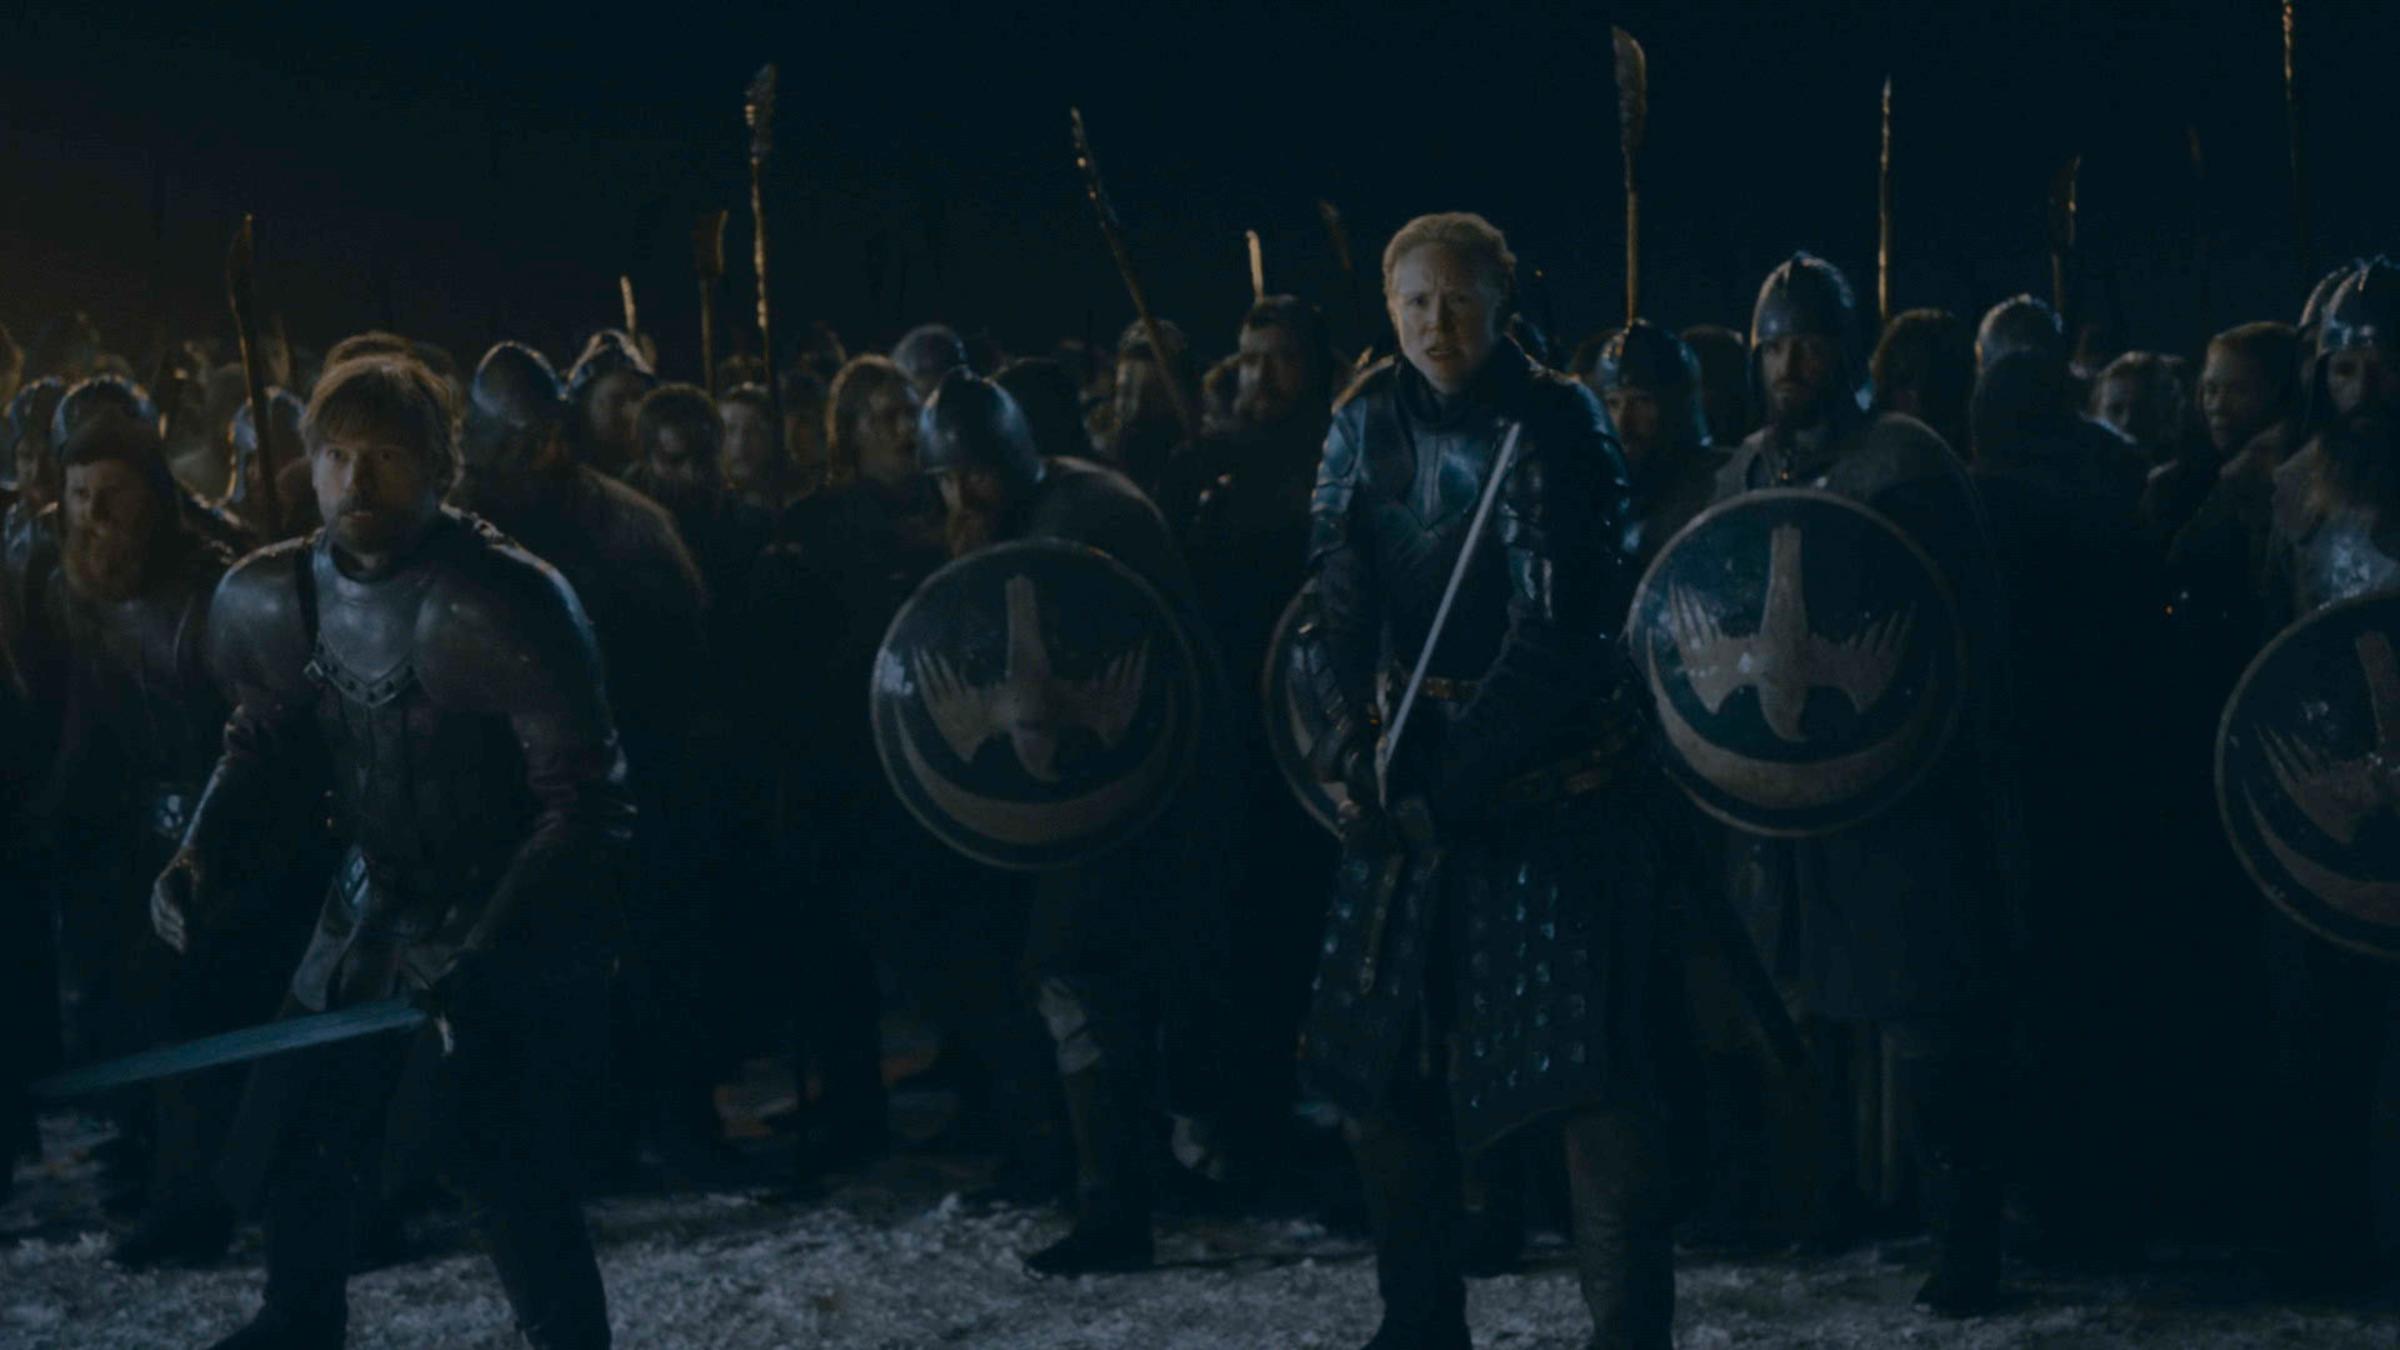 Jaime Lannister Brienne of Tarth are on the frontlines at the Battle of Winterfell in season 8 episode 3.